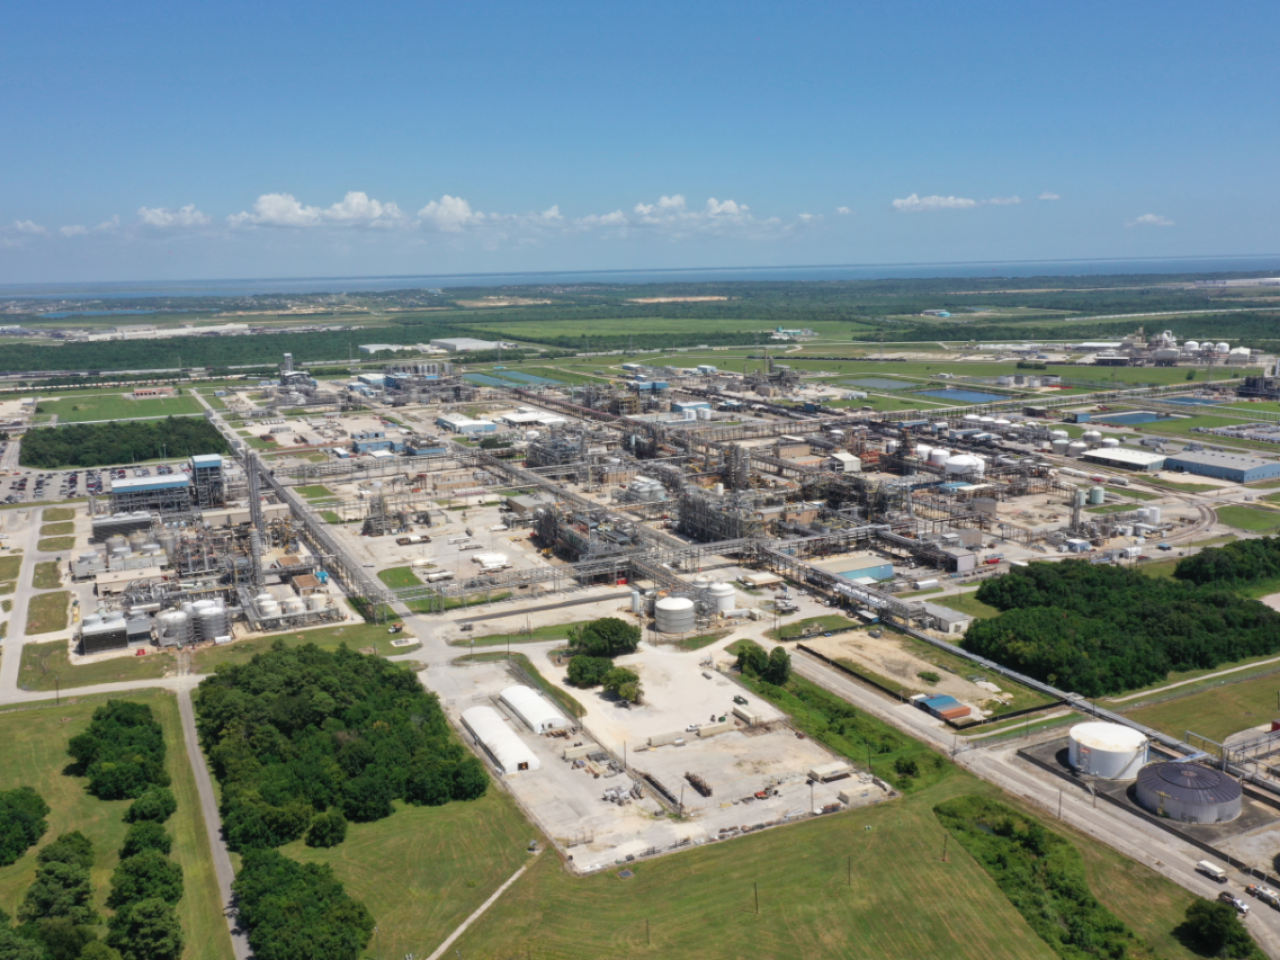 The virtual power purchase agreement between Covestro and Ørsted will help offset emissions at the Covestro site in Baytown, Texas.